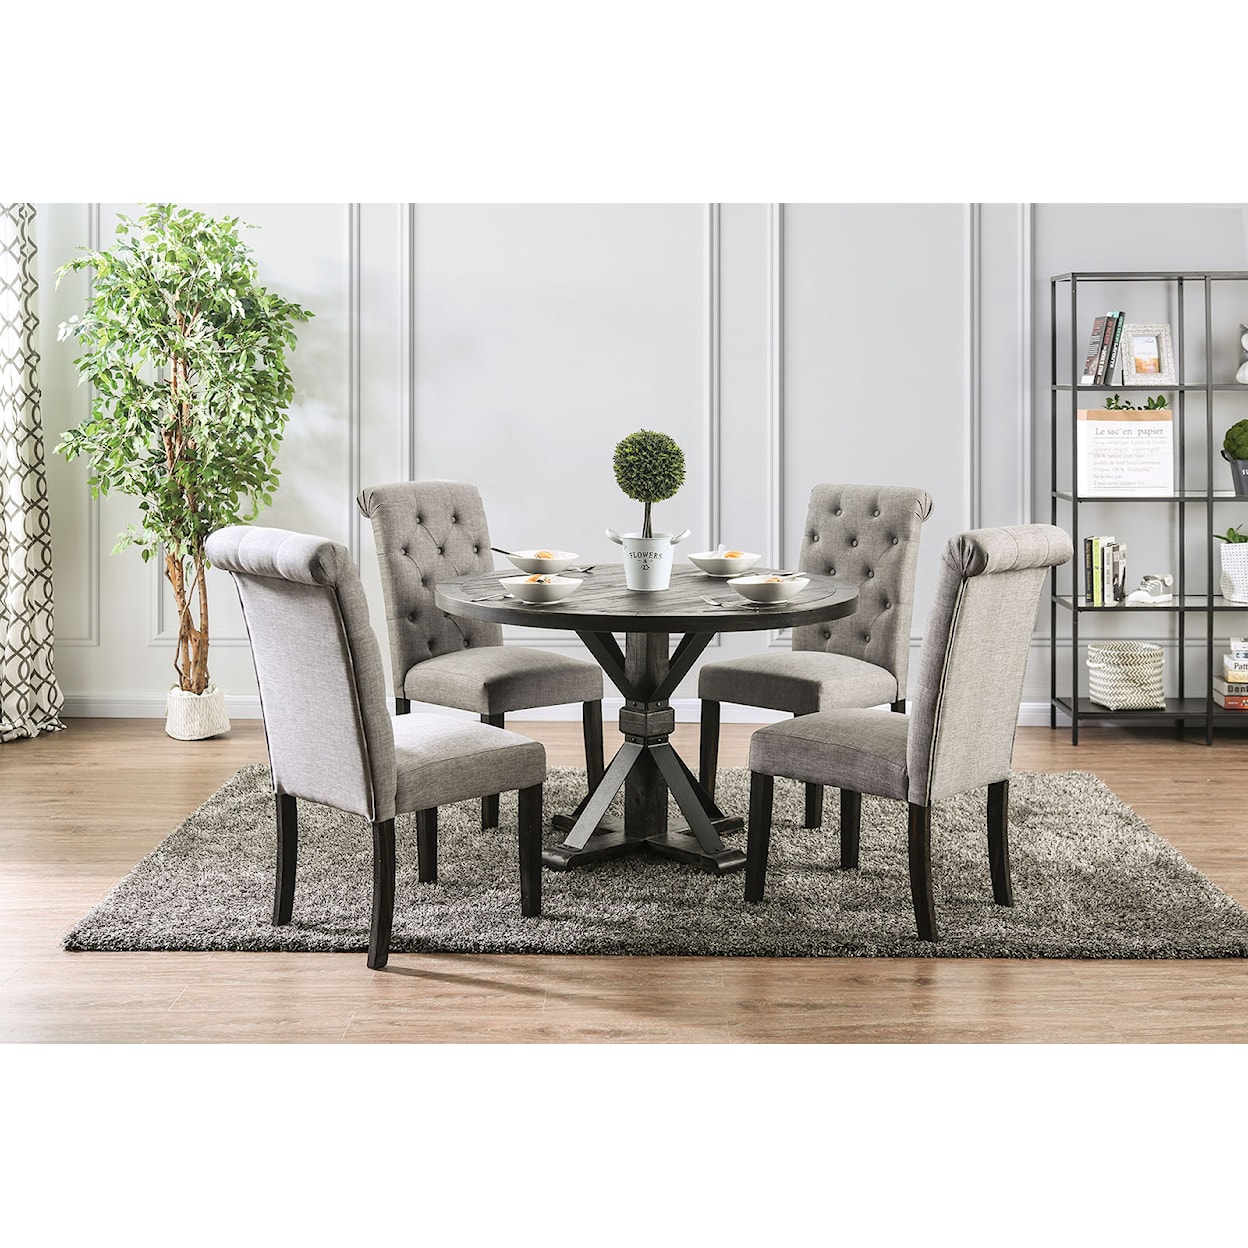 Furniture of America Alfred 5 Pc. Round Dining Table Set